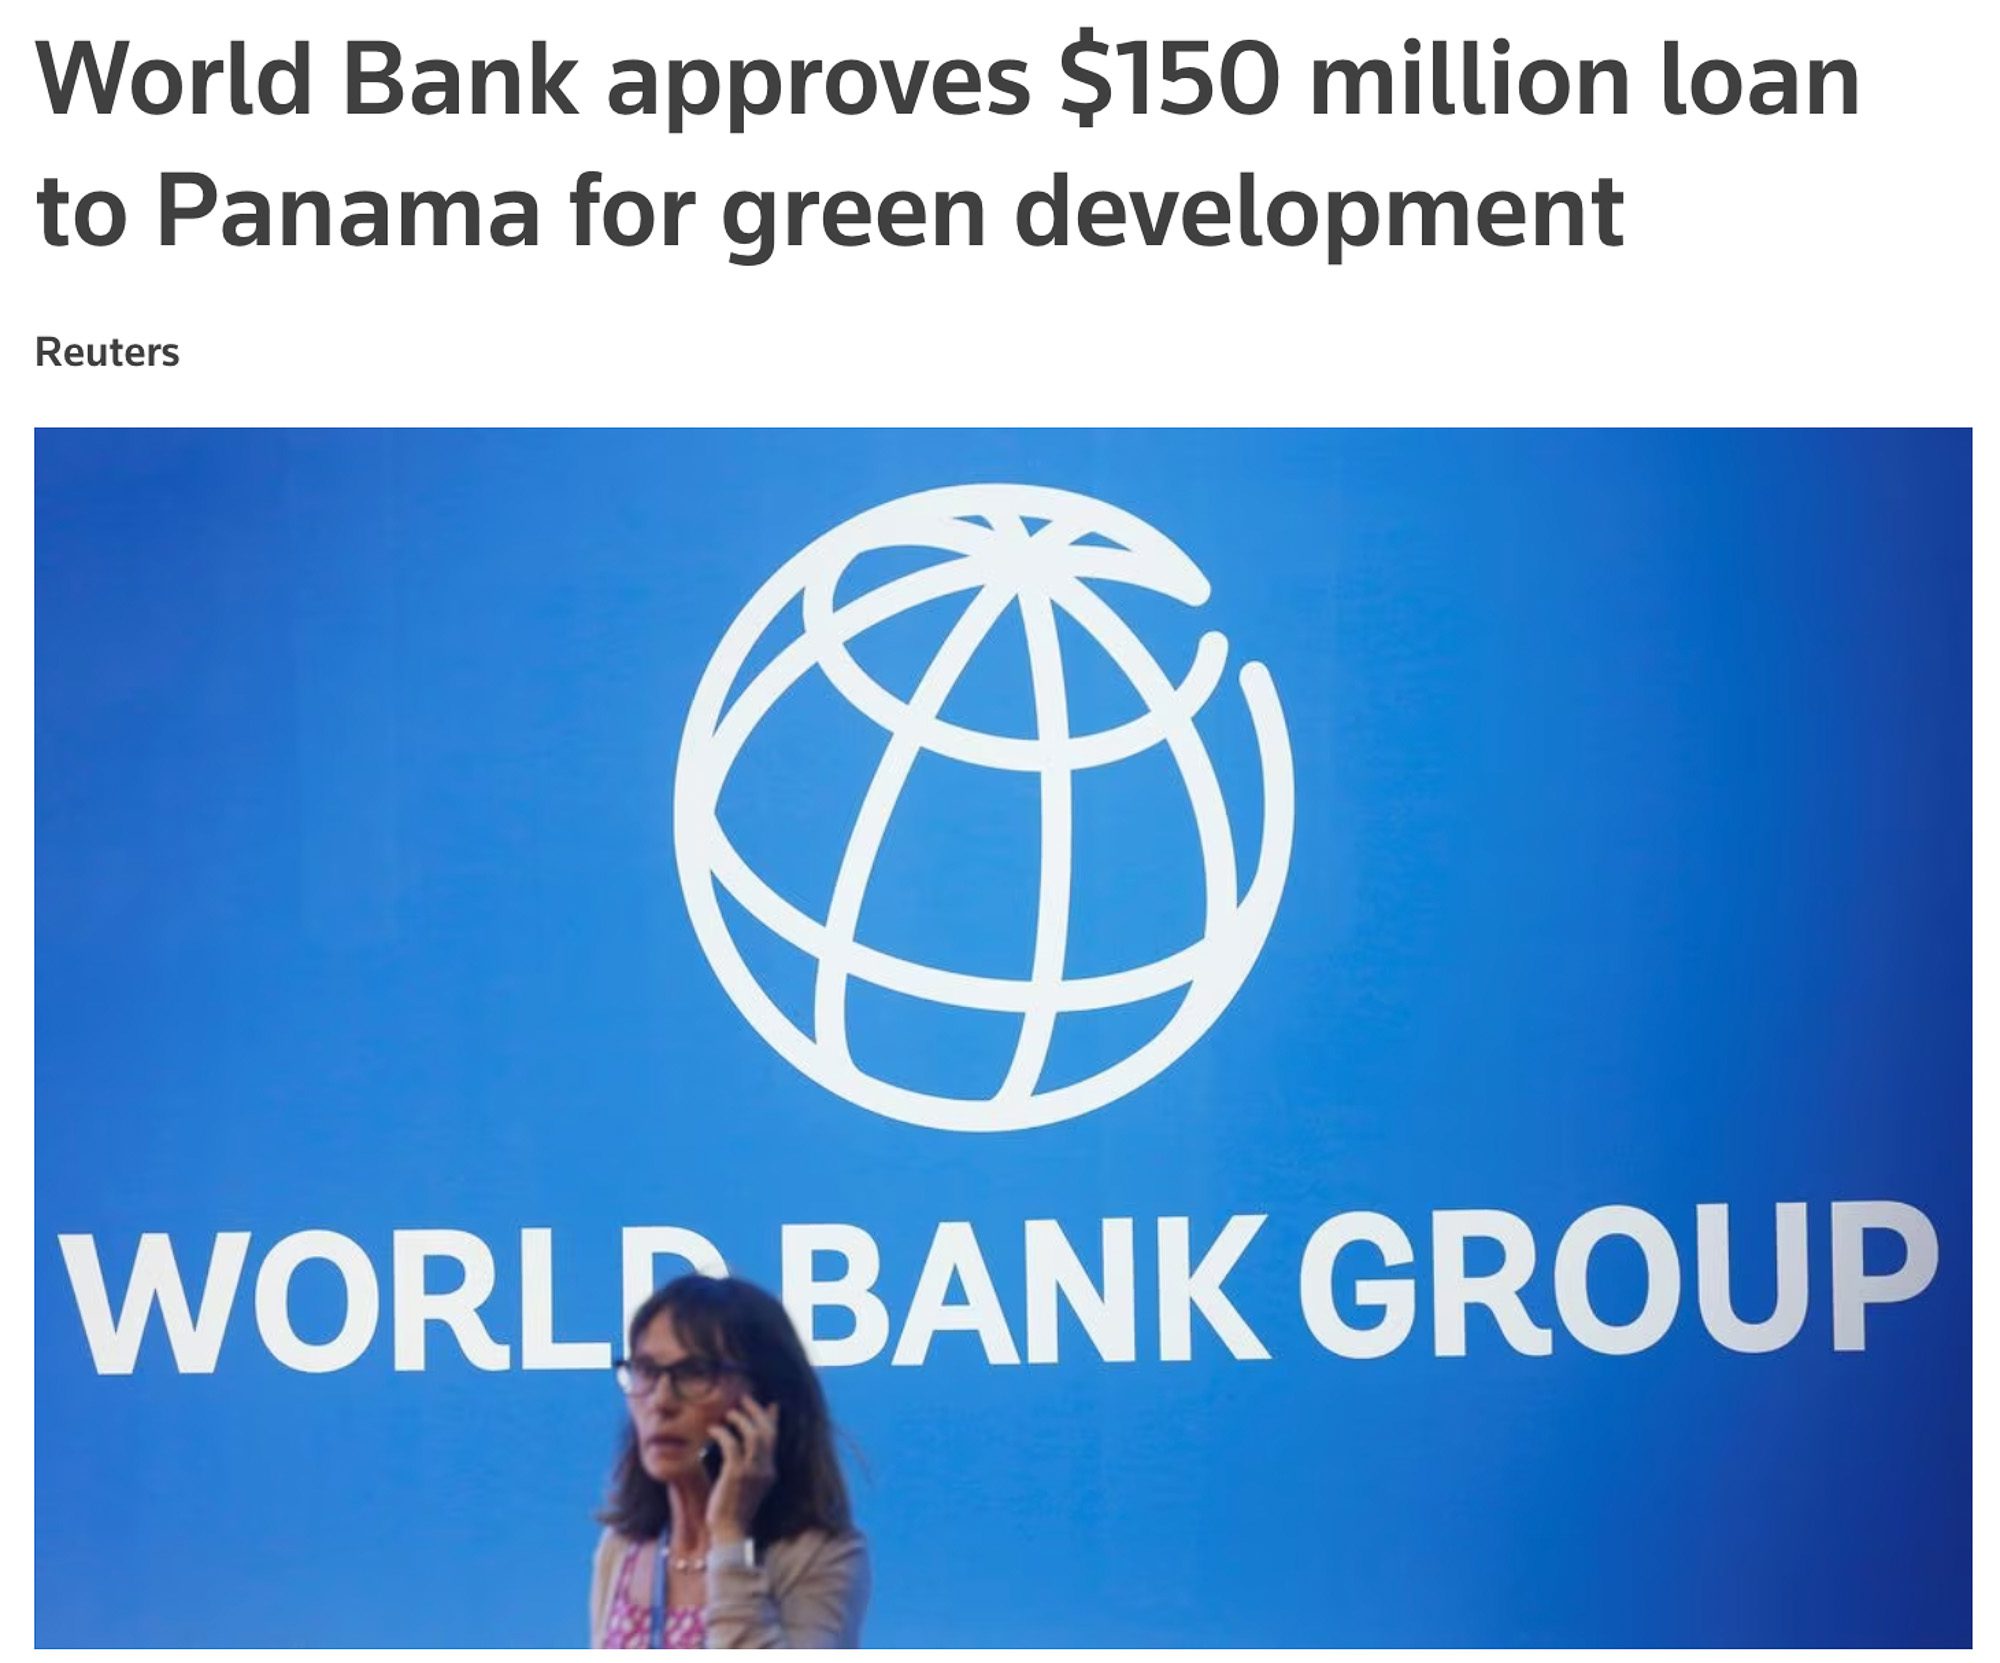 World Bank grants $150 million loan to Panama for sustainable growth and climate resilience